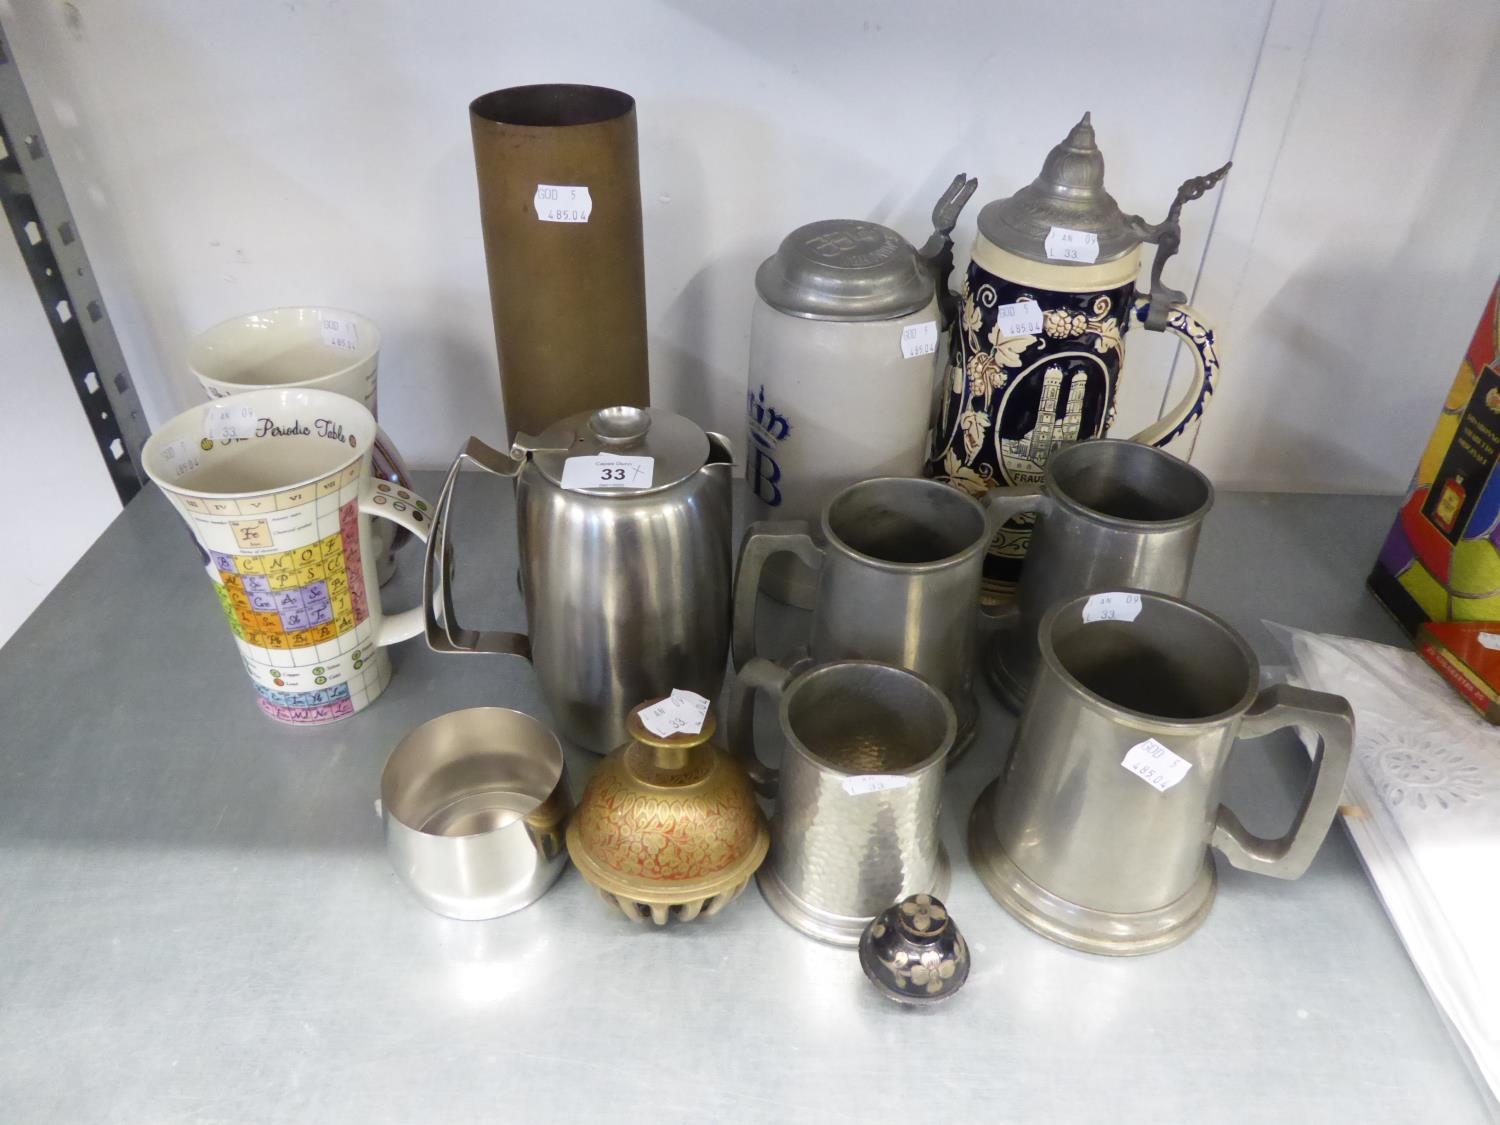 TWO LARGE POTTERY STEINS WITH PEWTER LIDS, FOUR PEWTER TANKARDS (THREE WITH GLASS BASES) 2 ITEMS